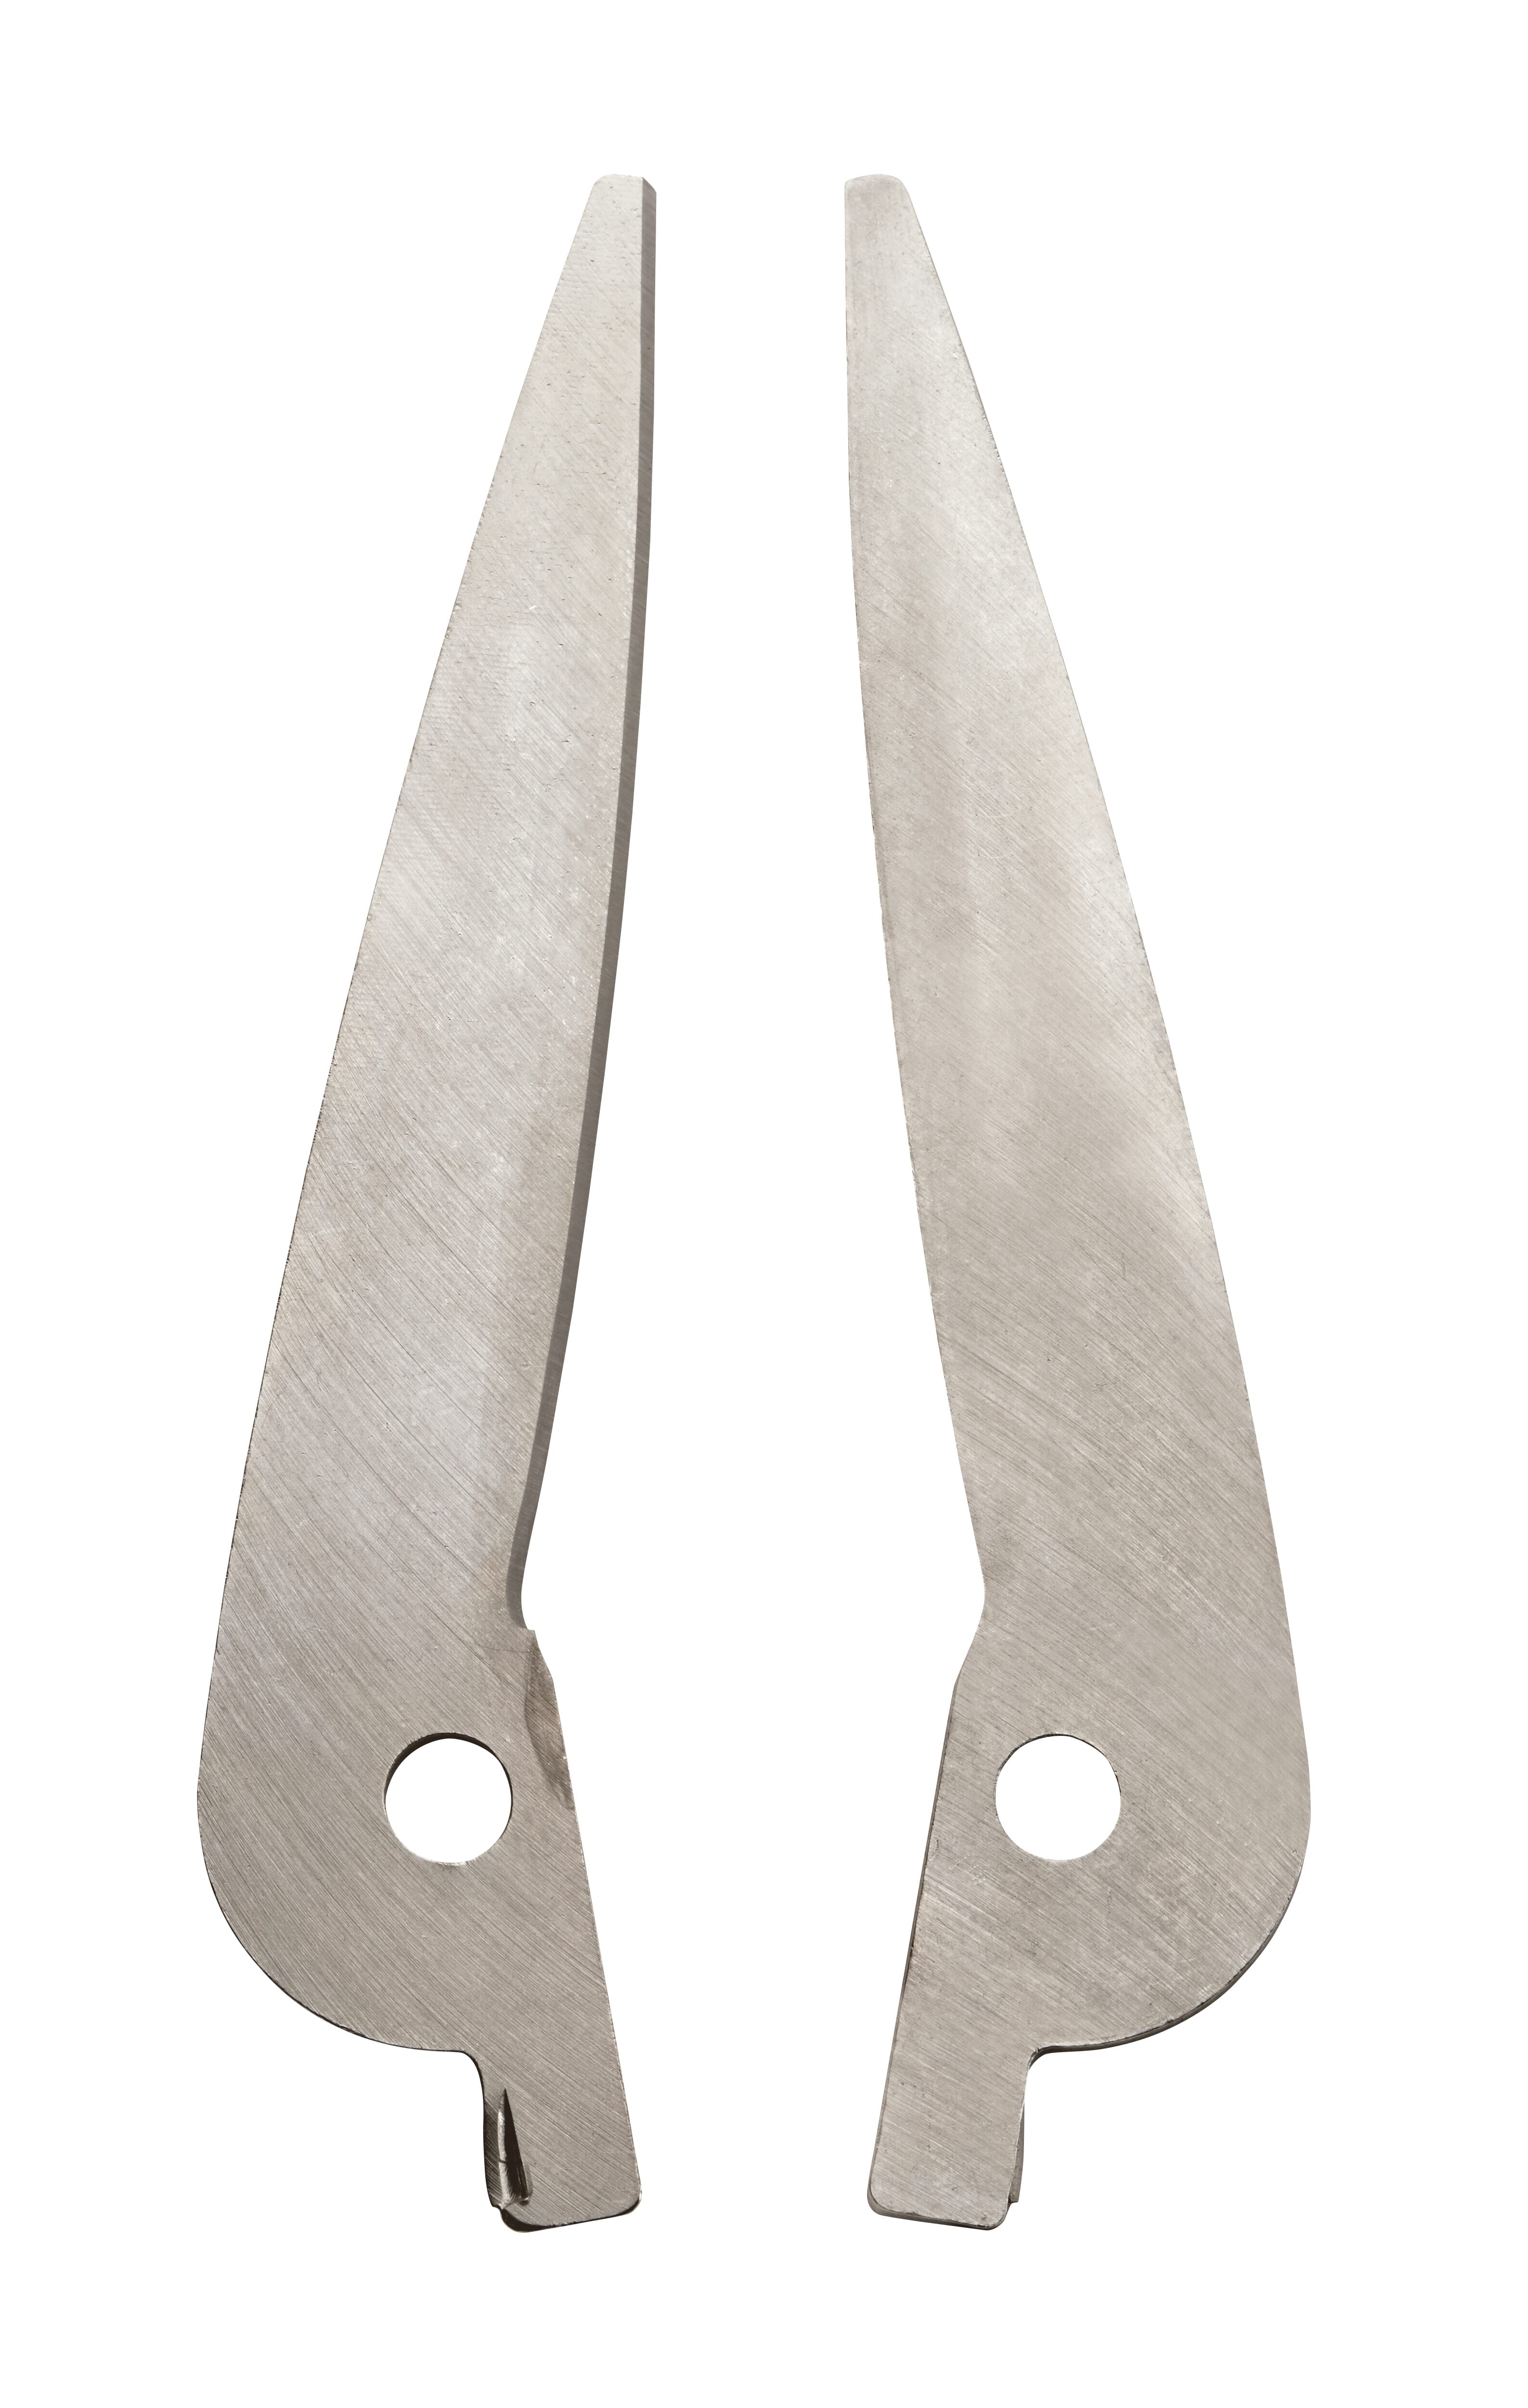 Milwaukee® 48-22-4007 Lightweight Tinner Replacement Blade, For Use With 48-22-4006 Rust-Resistant Tinner Snip, Non-Serrated Cutting Edge, Cold Rolled Steel, Stainless Steel Applicable Materials, Steel, Silver